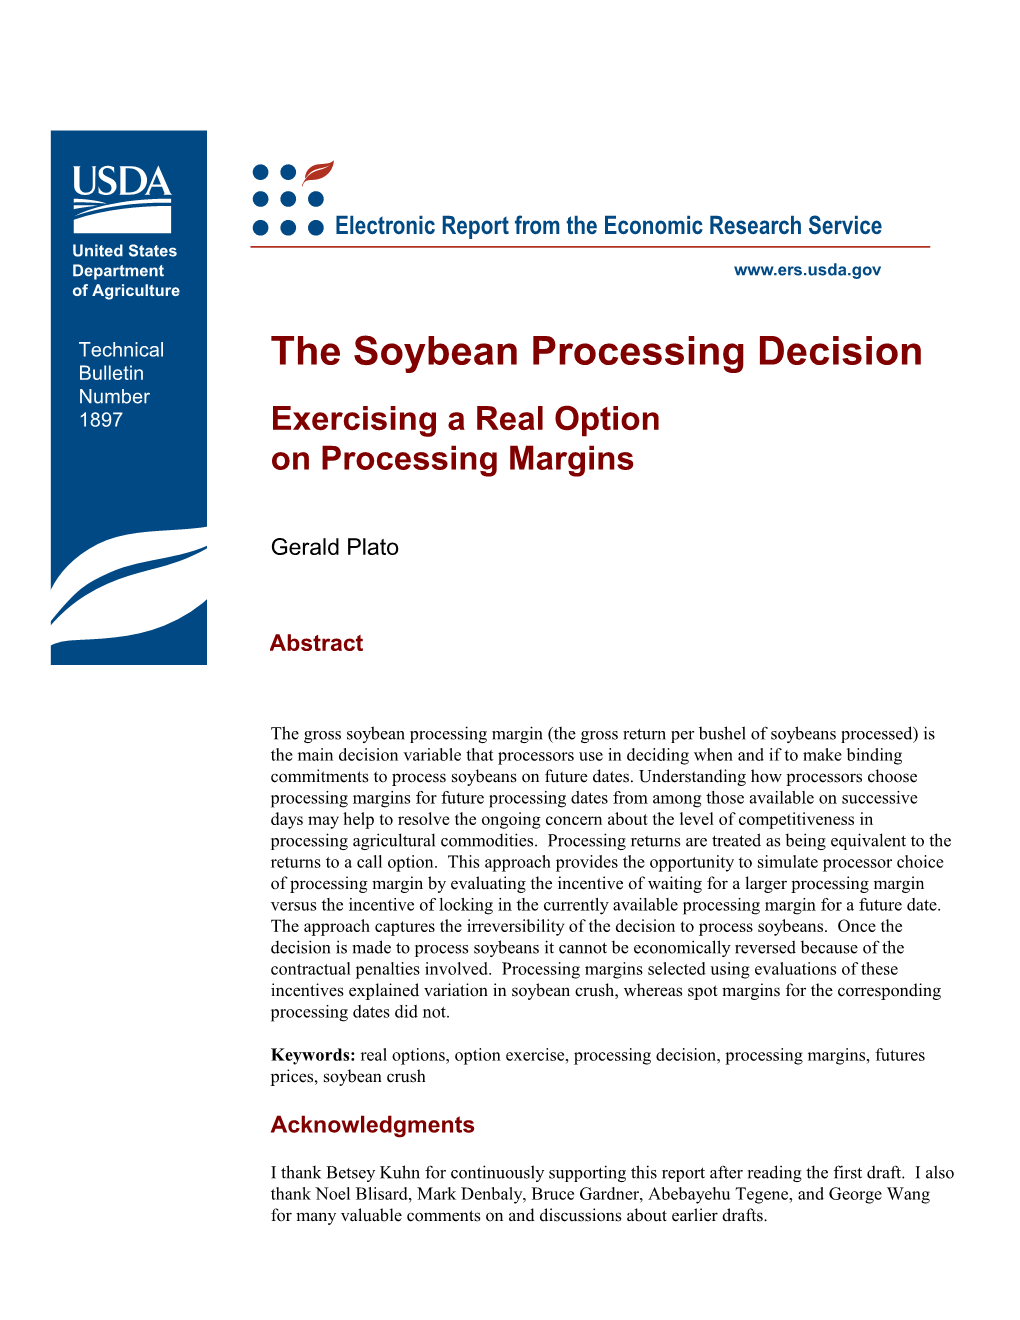 The Soybean Processing Decision: Exercising a Real Option On